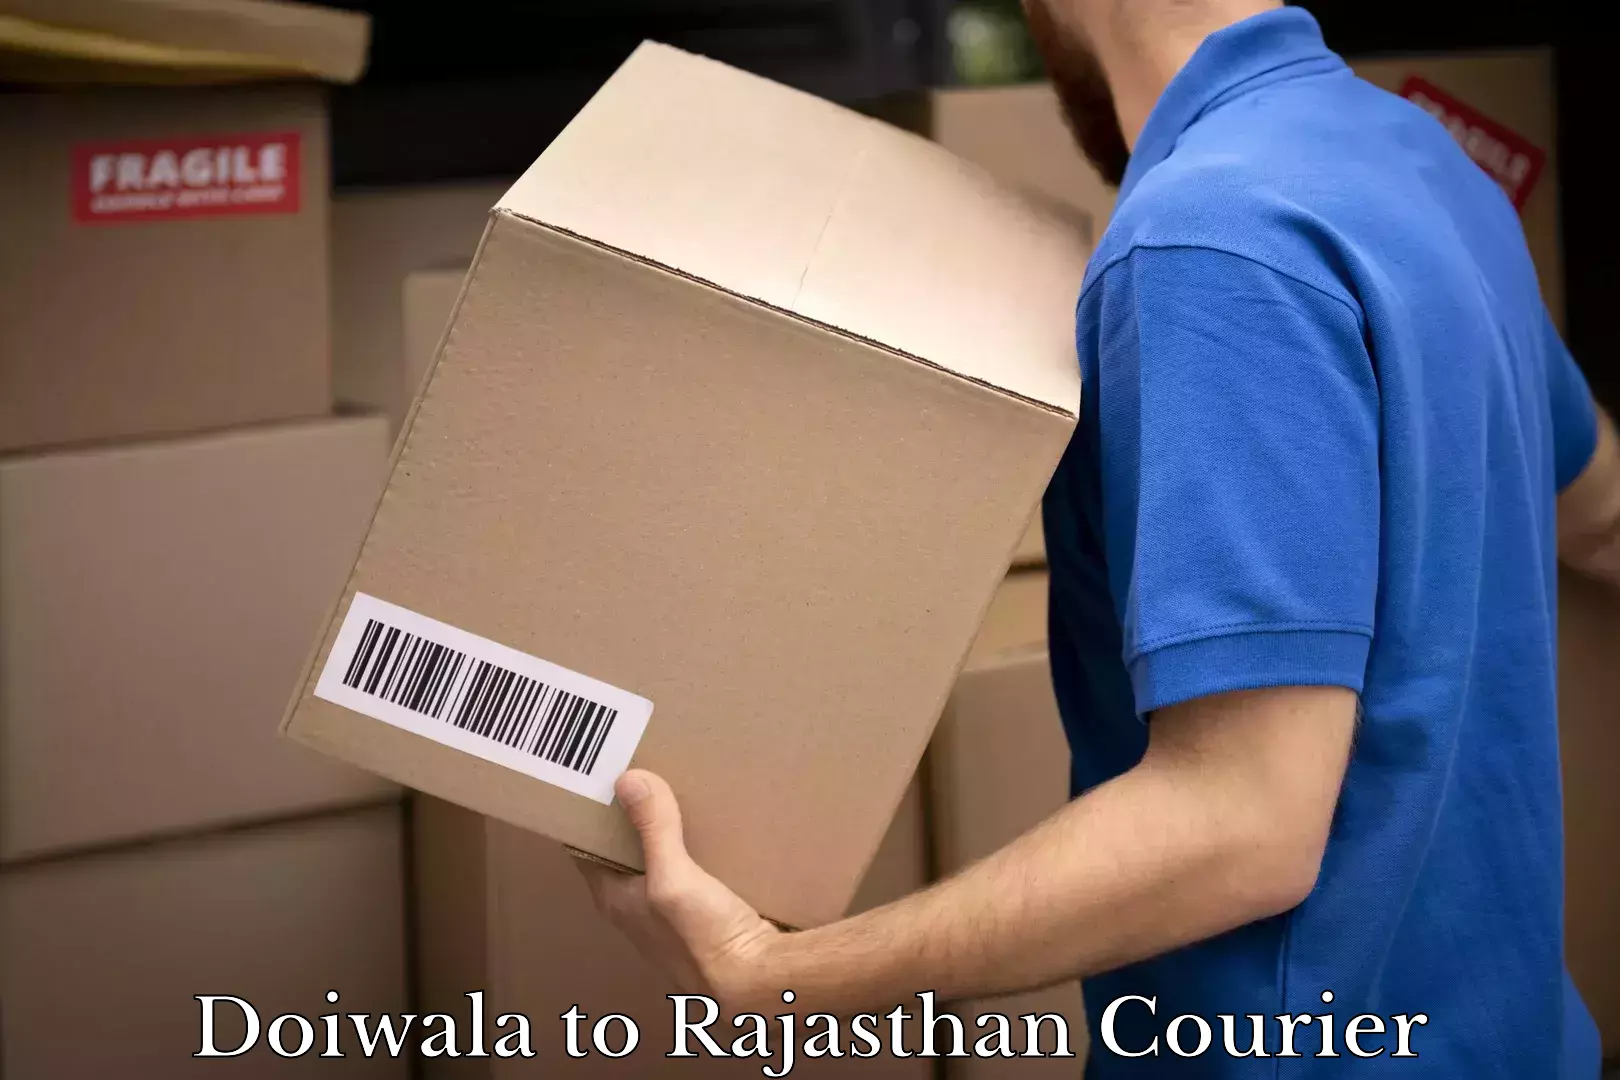 State-of-the-art courier technology Doiwala to Rajasthan